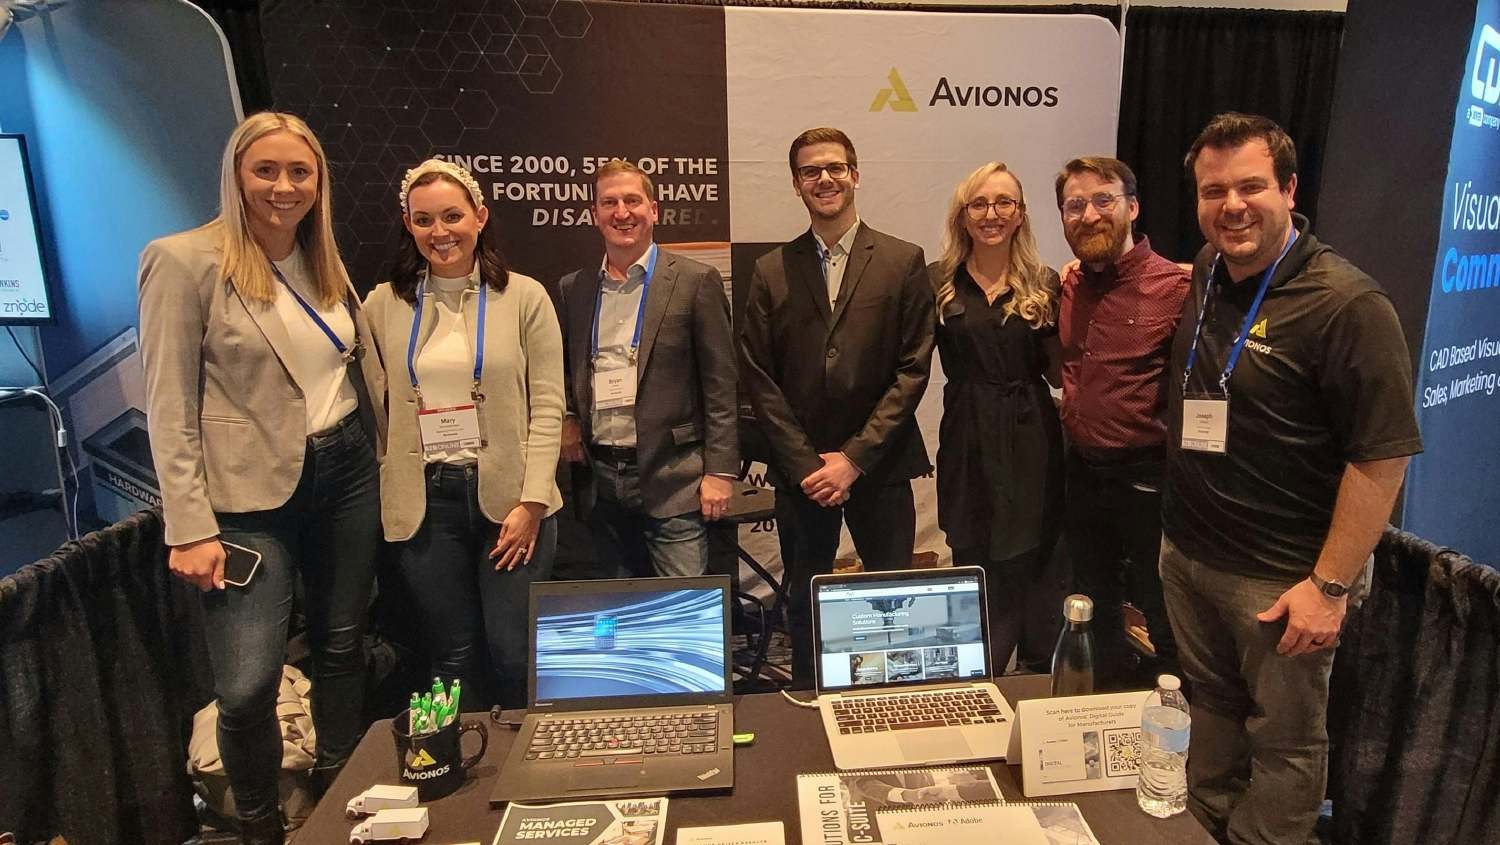 Members of our team proudly representing Avionos at a local conference.